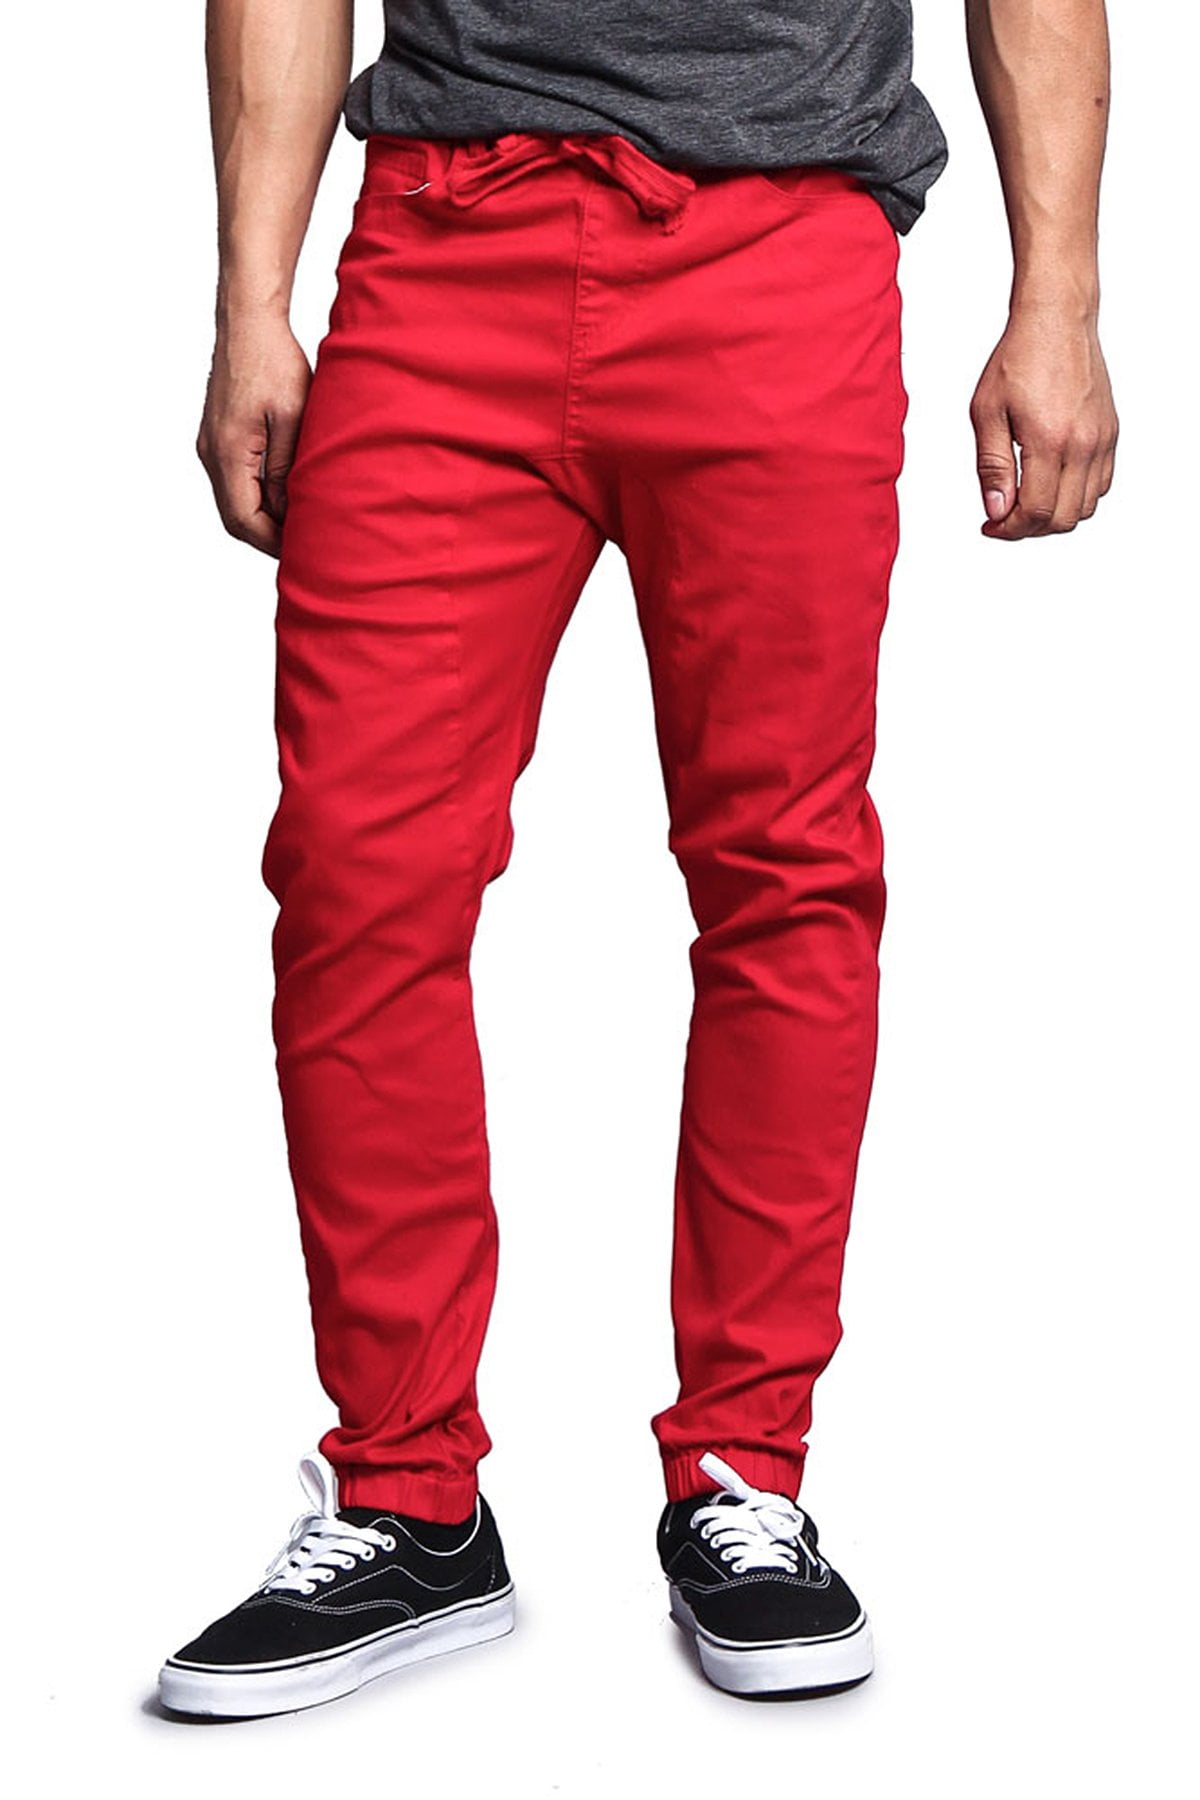 G-Style USA - Victorious Men's Drop Crotch Jogger Twill Pants - Red ...